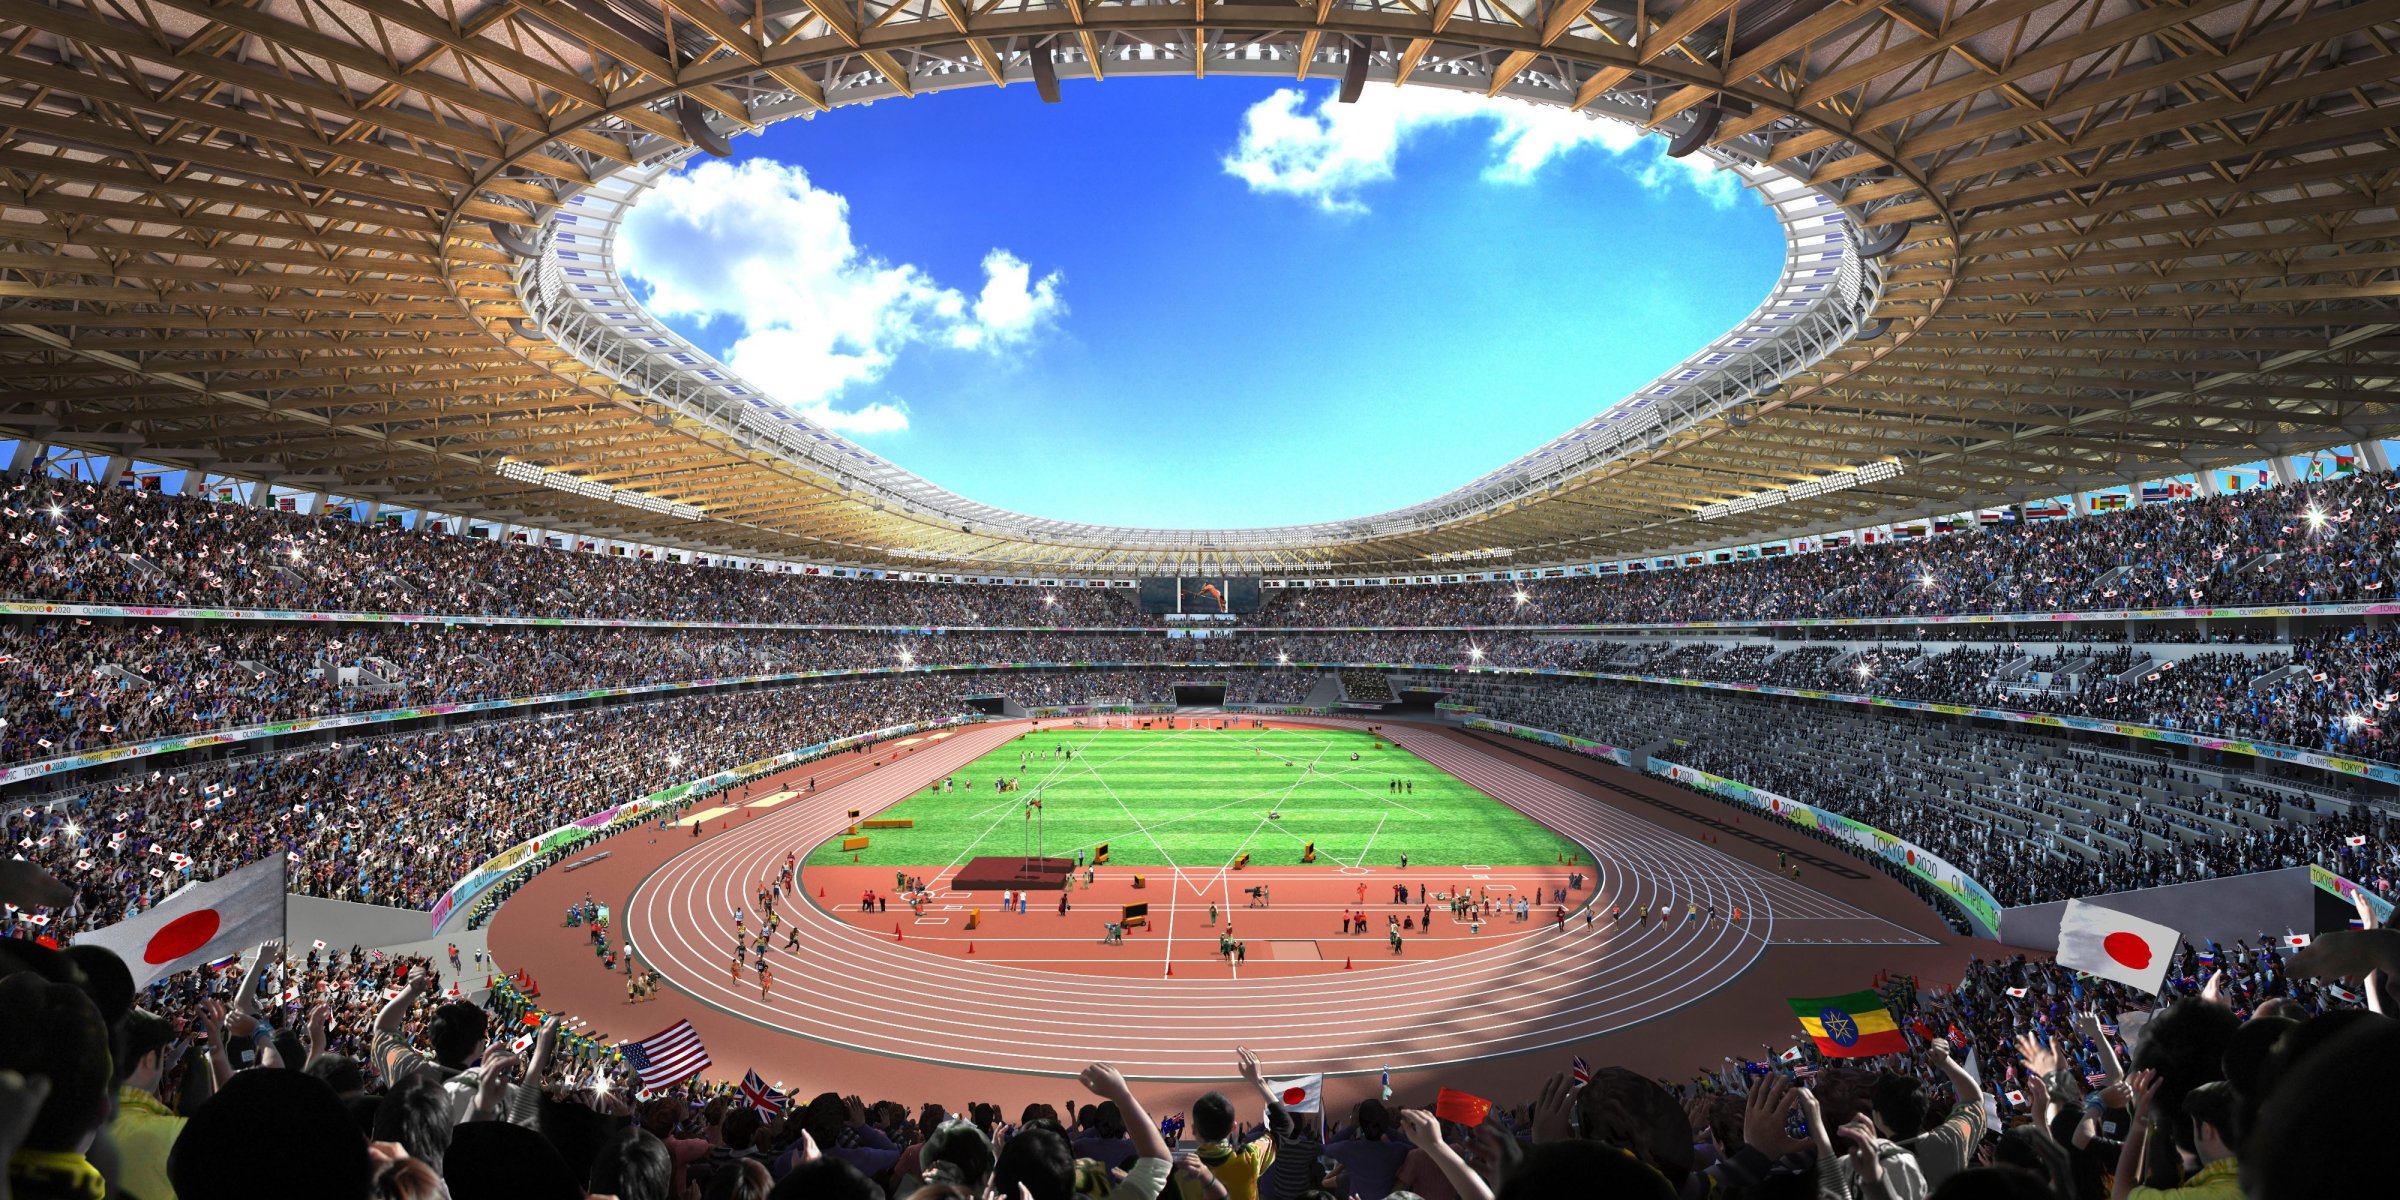 Japan selects the new design for the main stadium for the 2020 Tokyo Olympics